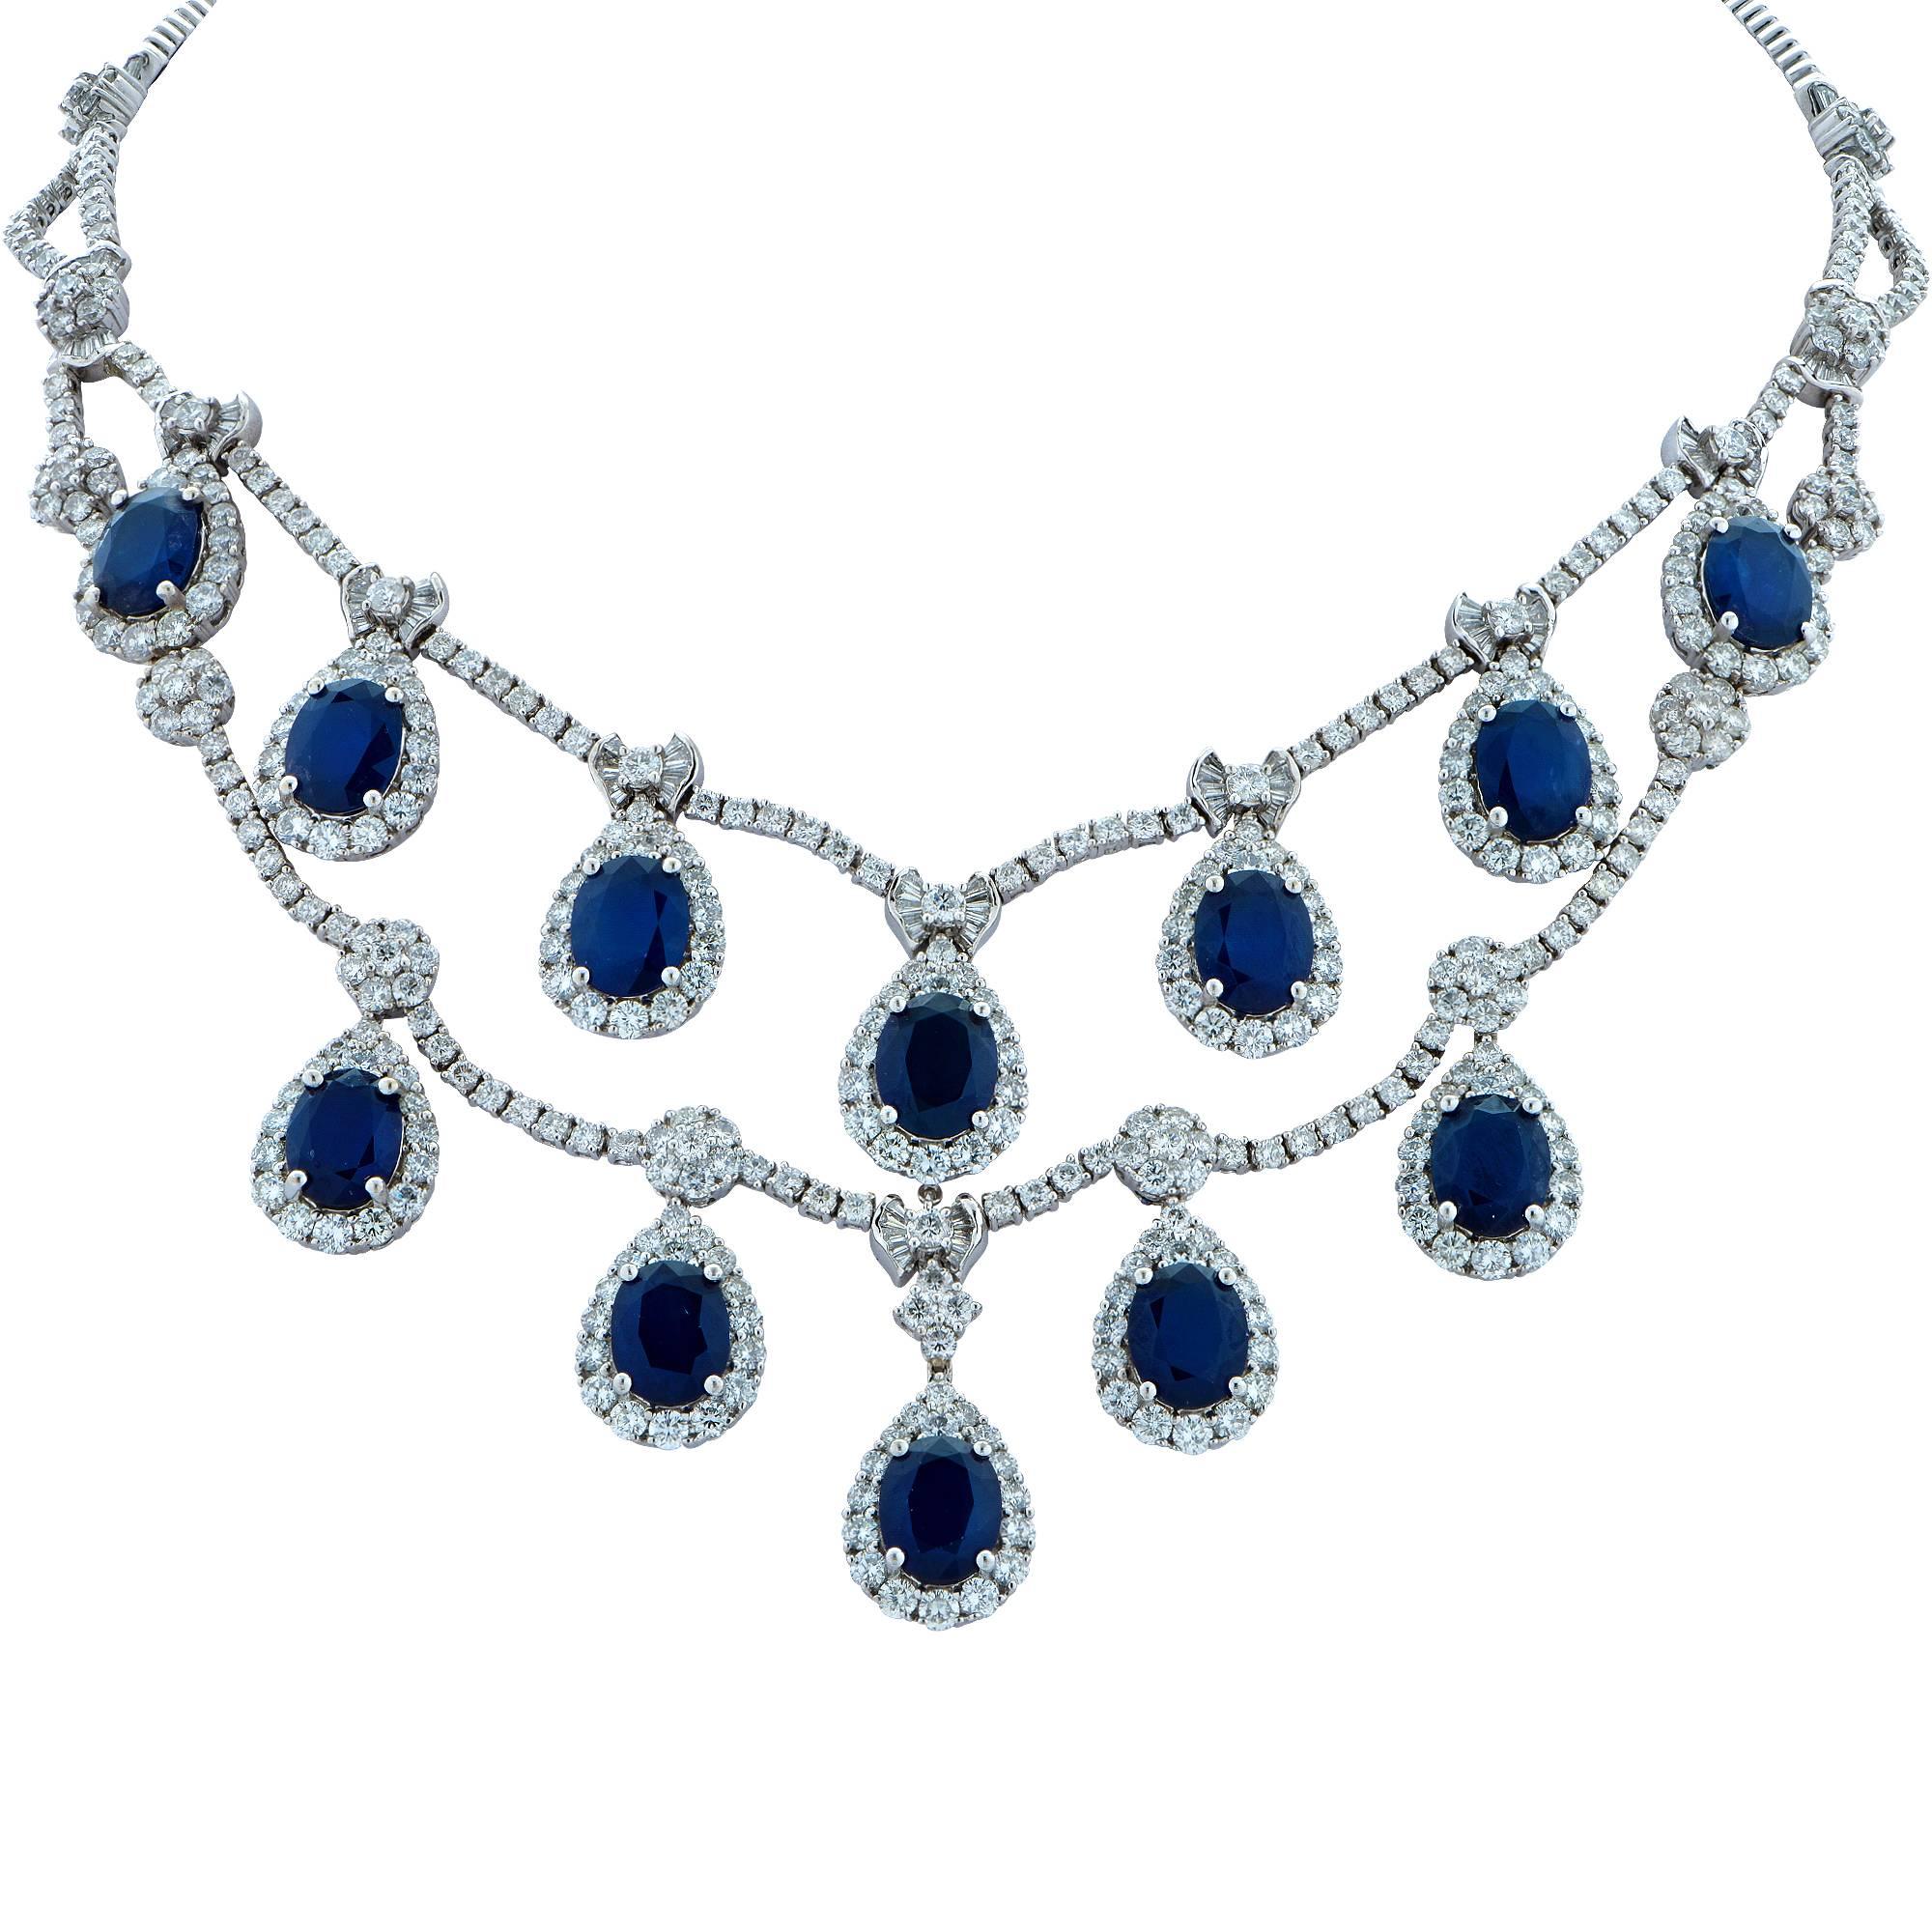 Impressive Sapphire and Diamond Necklace and earrings